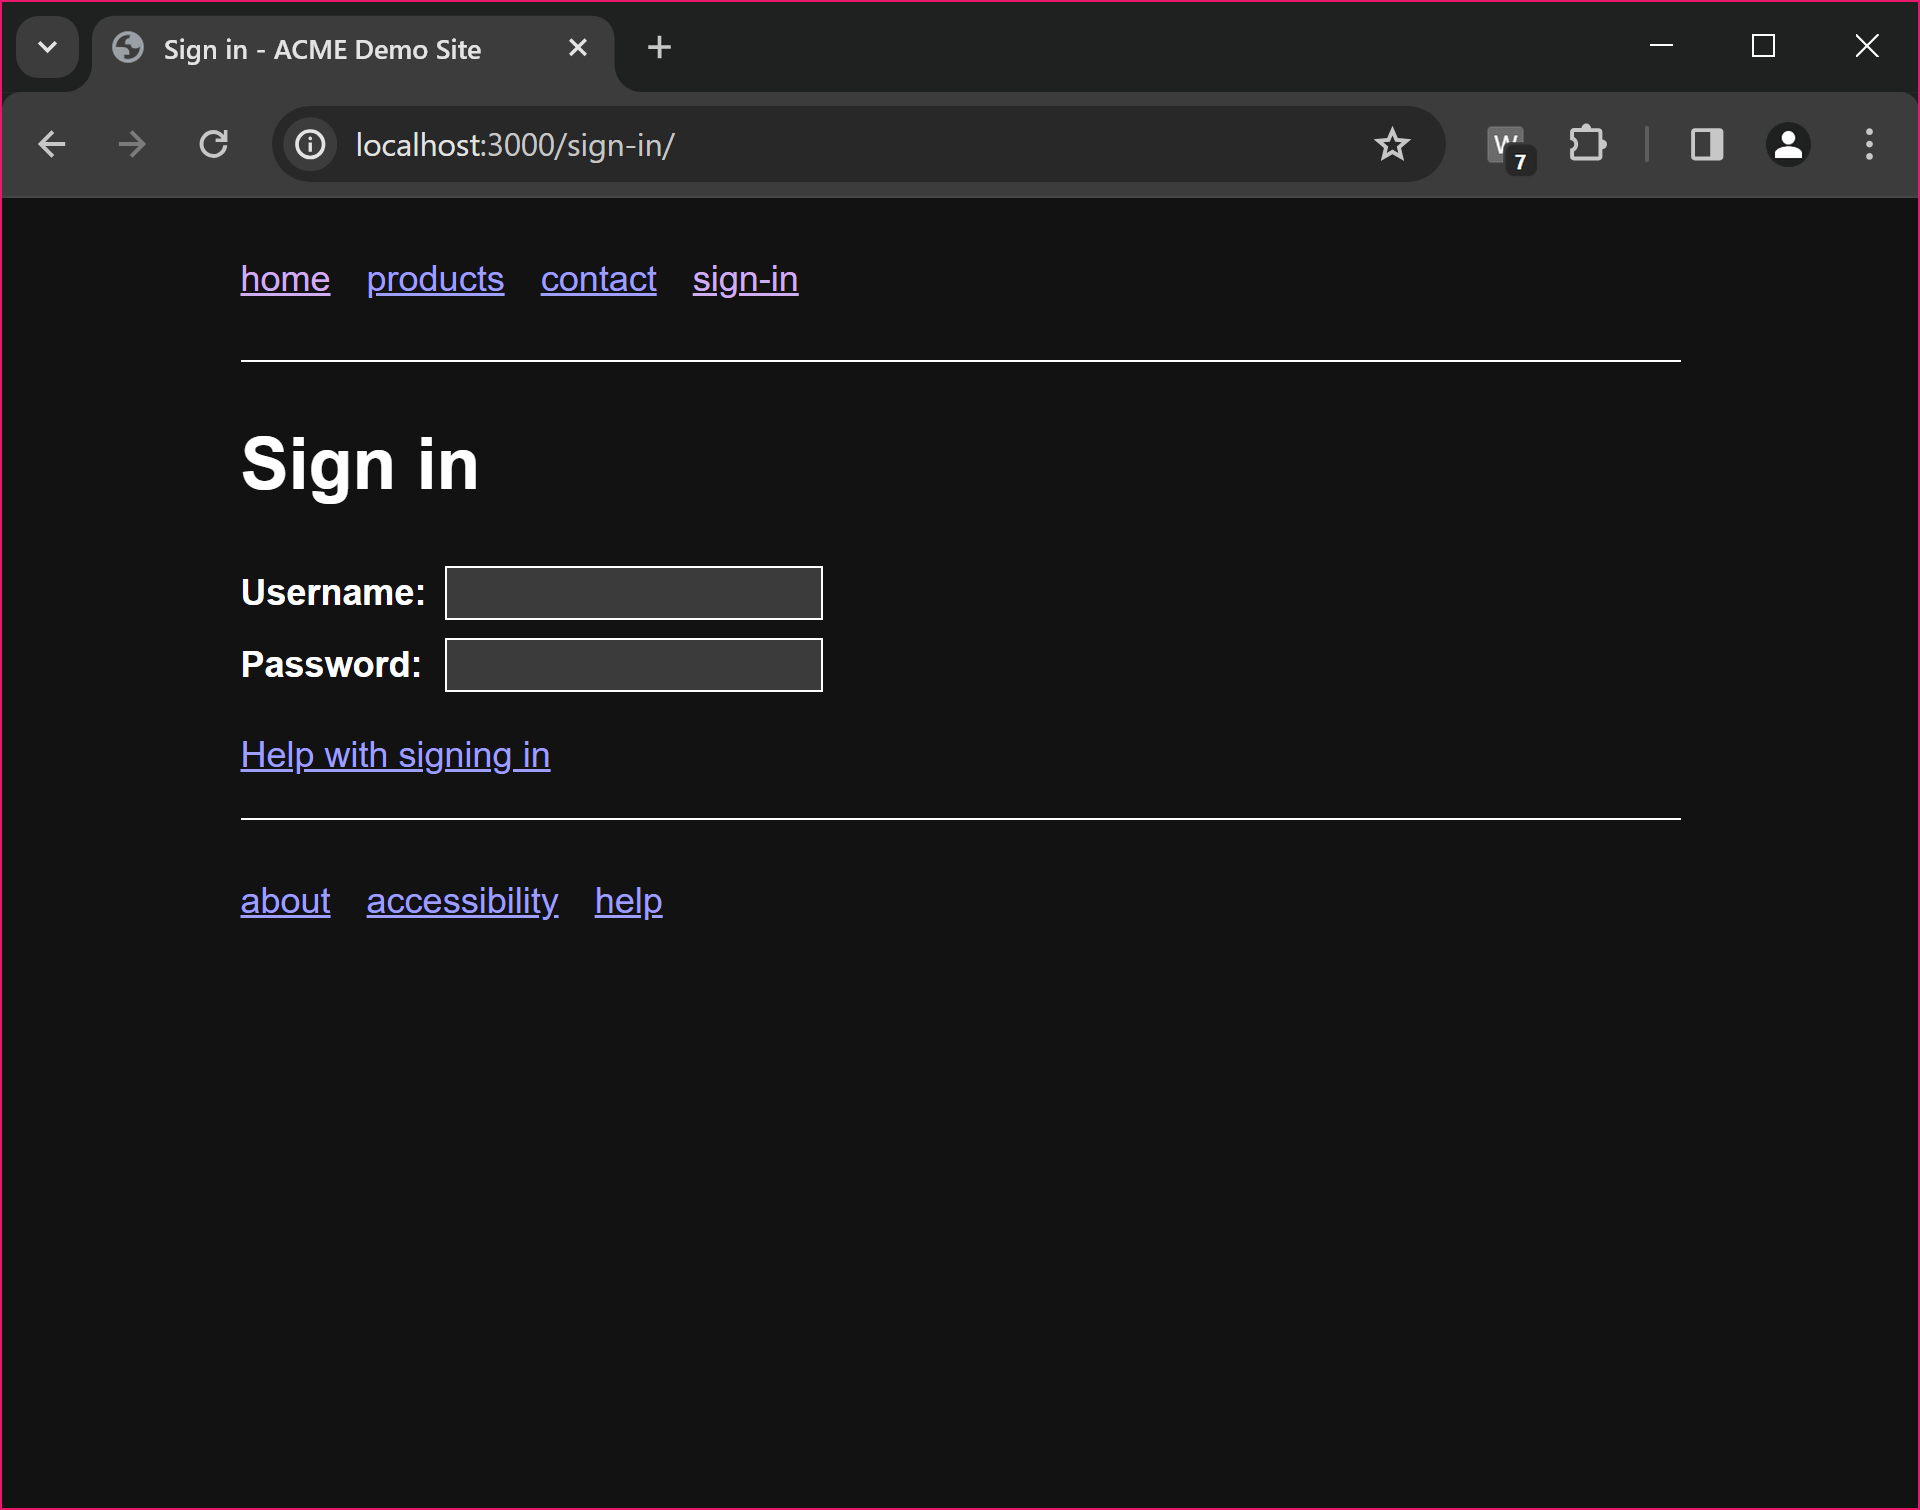 The ACME Inc. log in page (called 'Sign in' on the page itself).